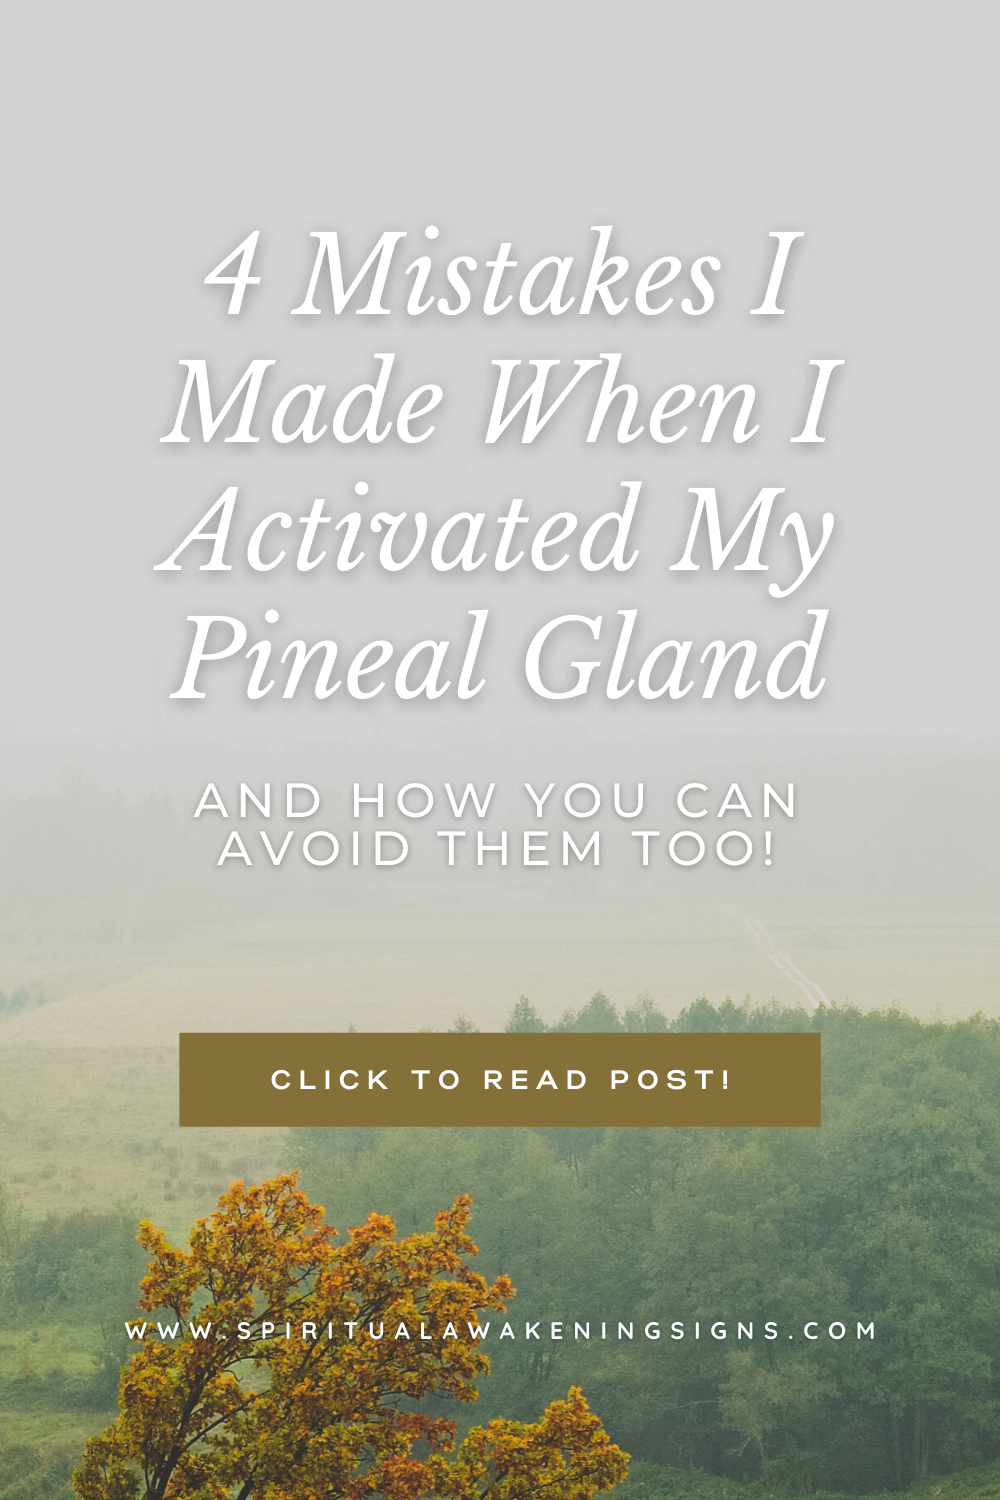 4 Mistakes I Made When I Activated My Pineal Gland (and how you can avoid them too!)